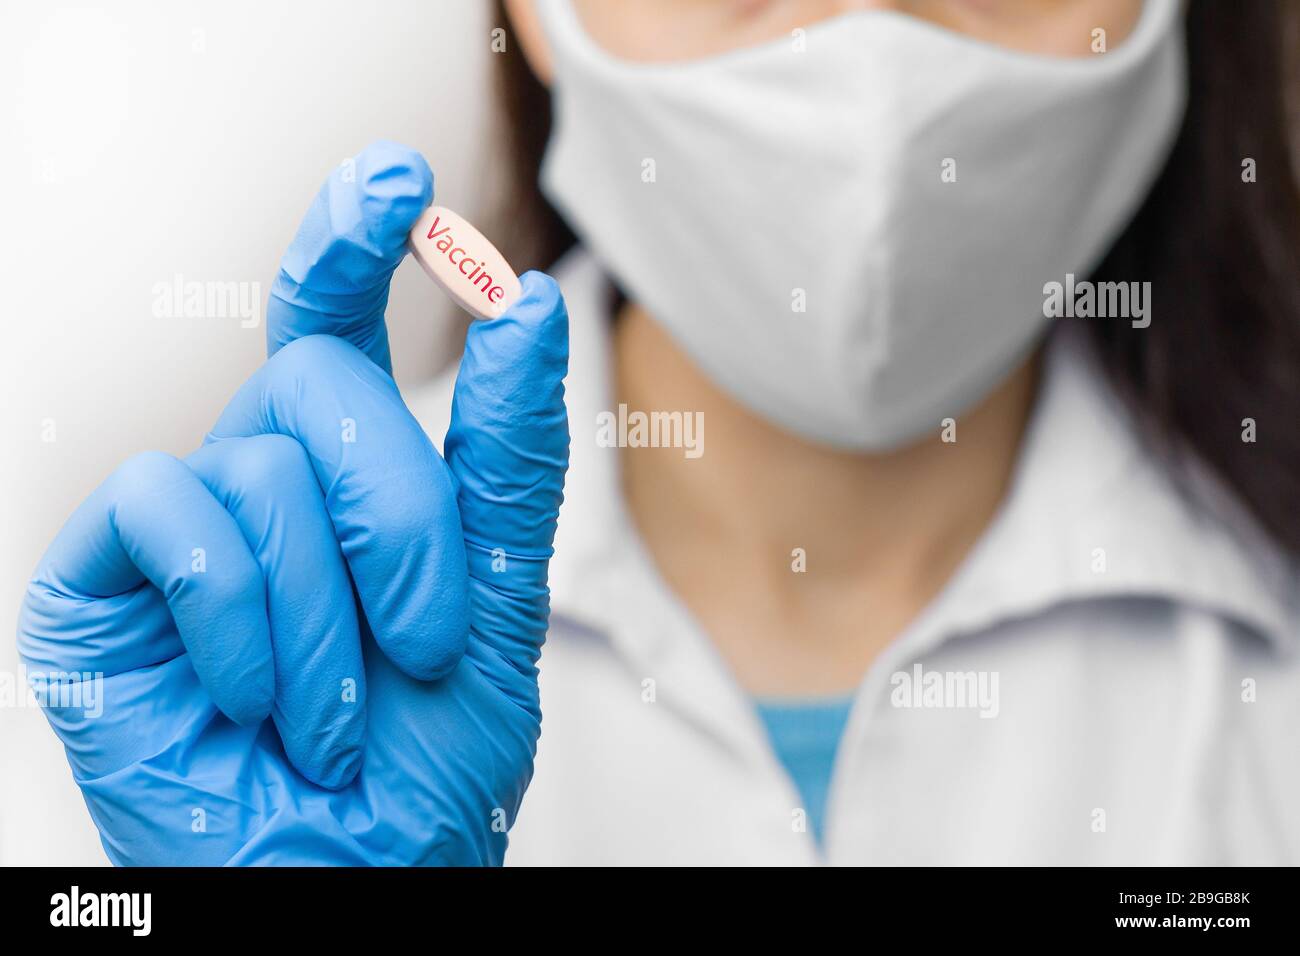 A pill in hand in blue gloves. Female is holding a vaccine against coronavirus,2019-nCoV, SARS-nCov, COVID-2019 outbreaking. Stock Photo